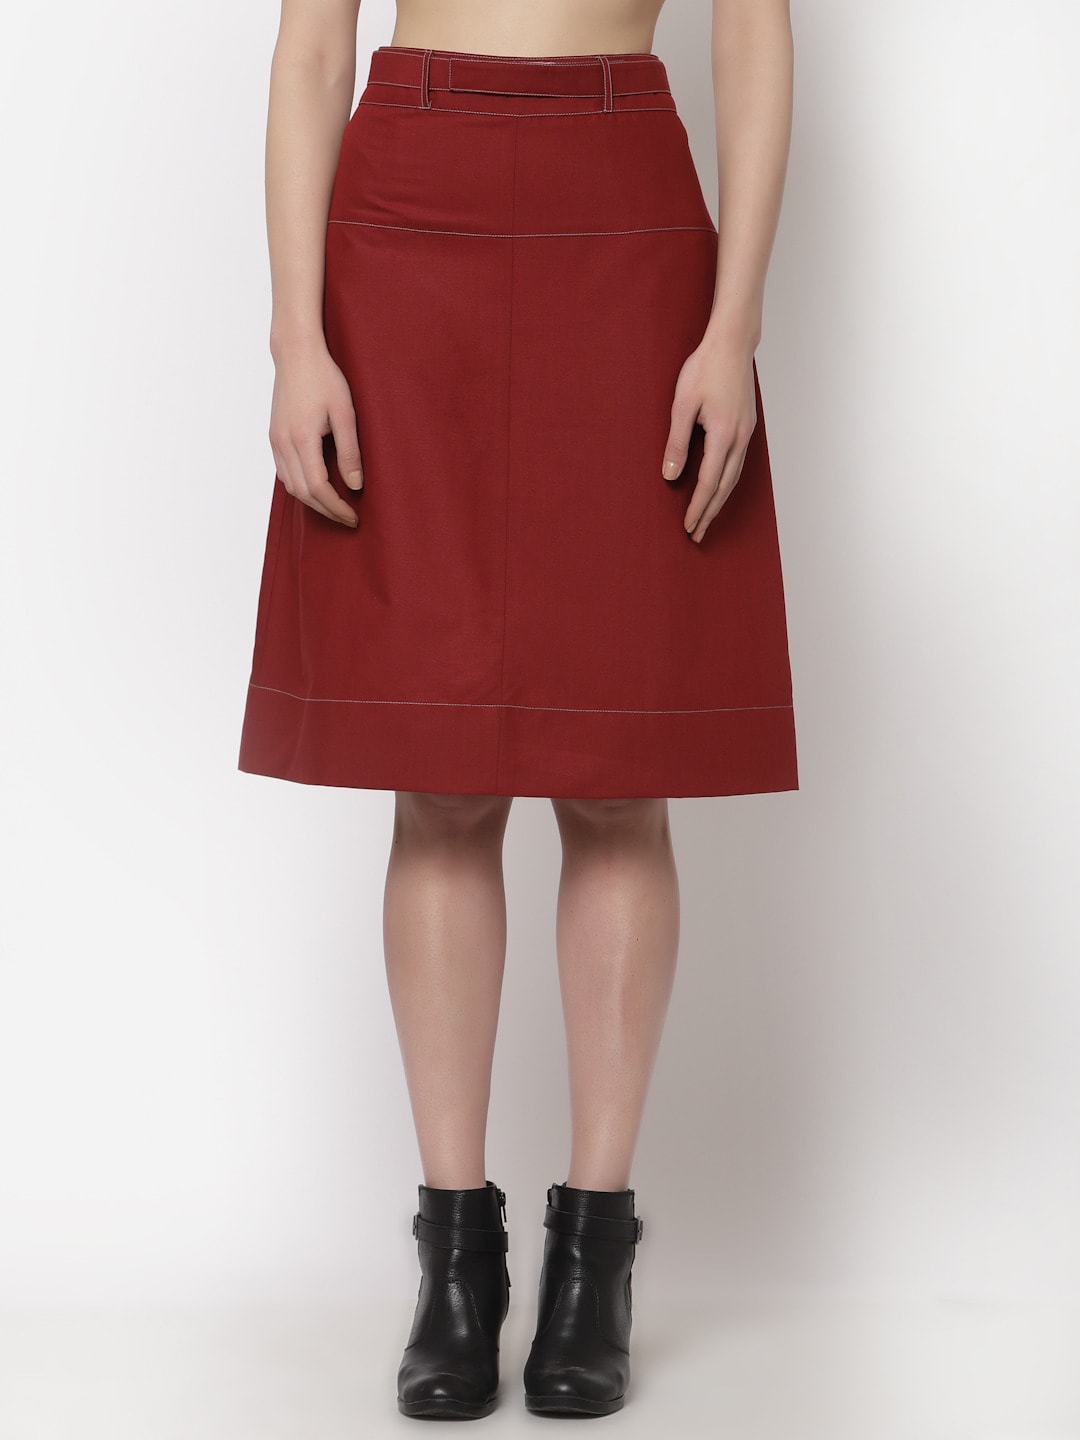 OFFICE & YOU A-Line Knee-Length Contrast Top Stitched Skirts